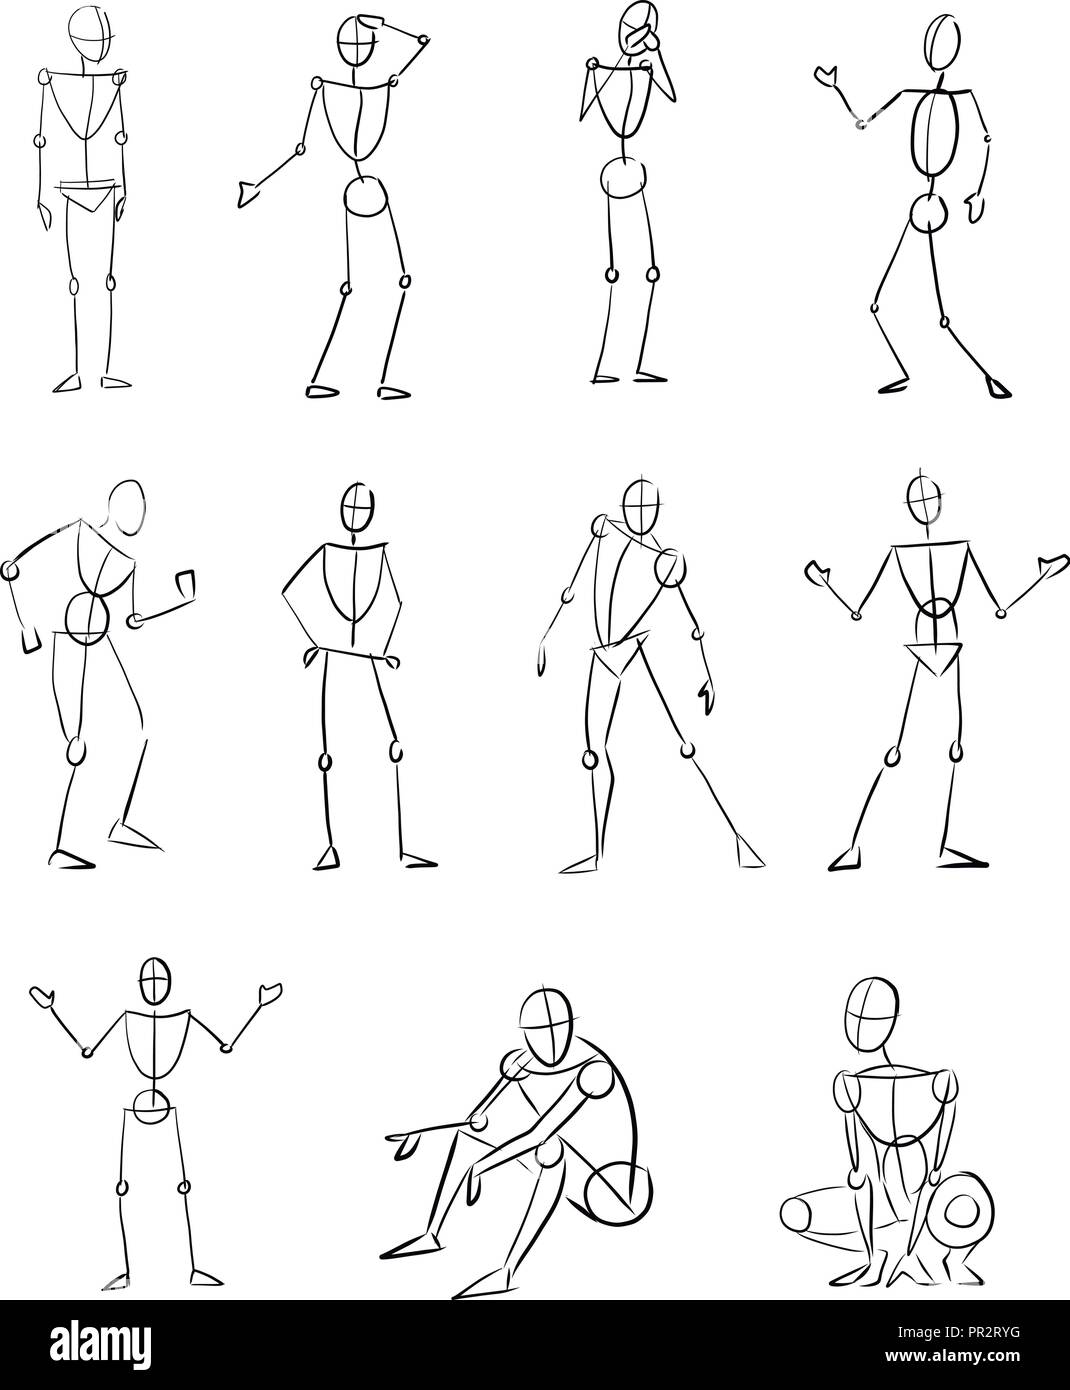 Hand drawn vector digital illustration or drawing of different human